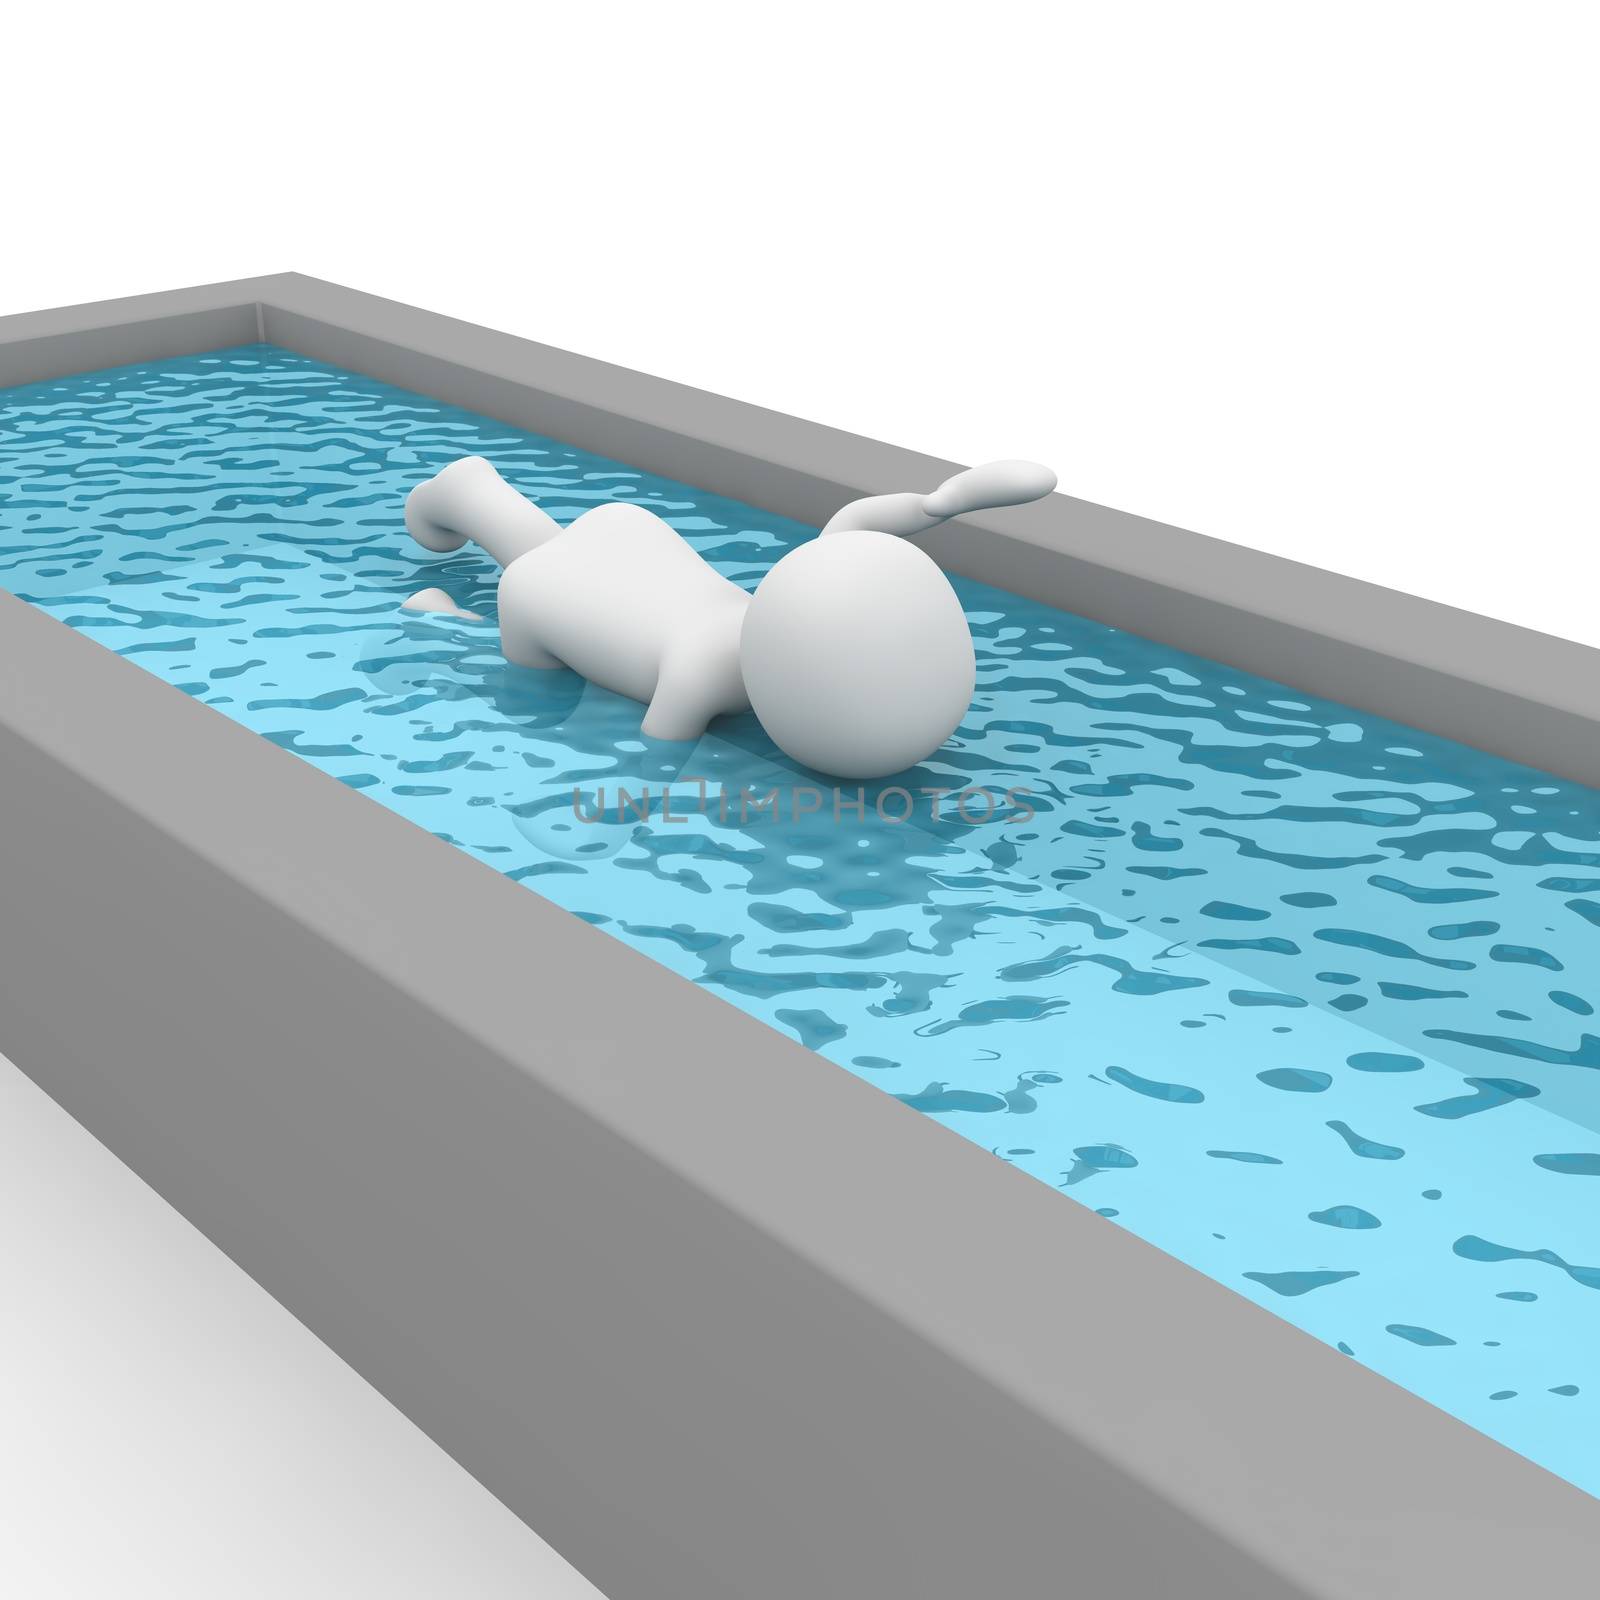 A 3d character swimming in a swimming pool.